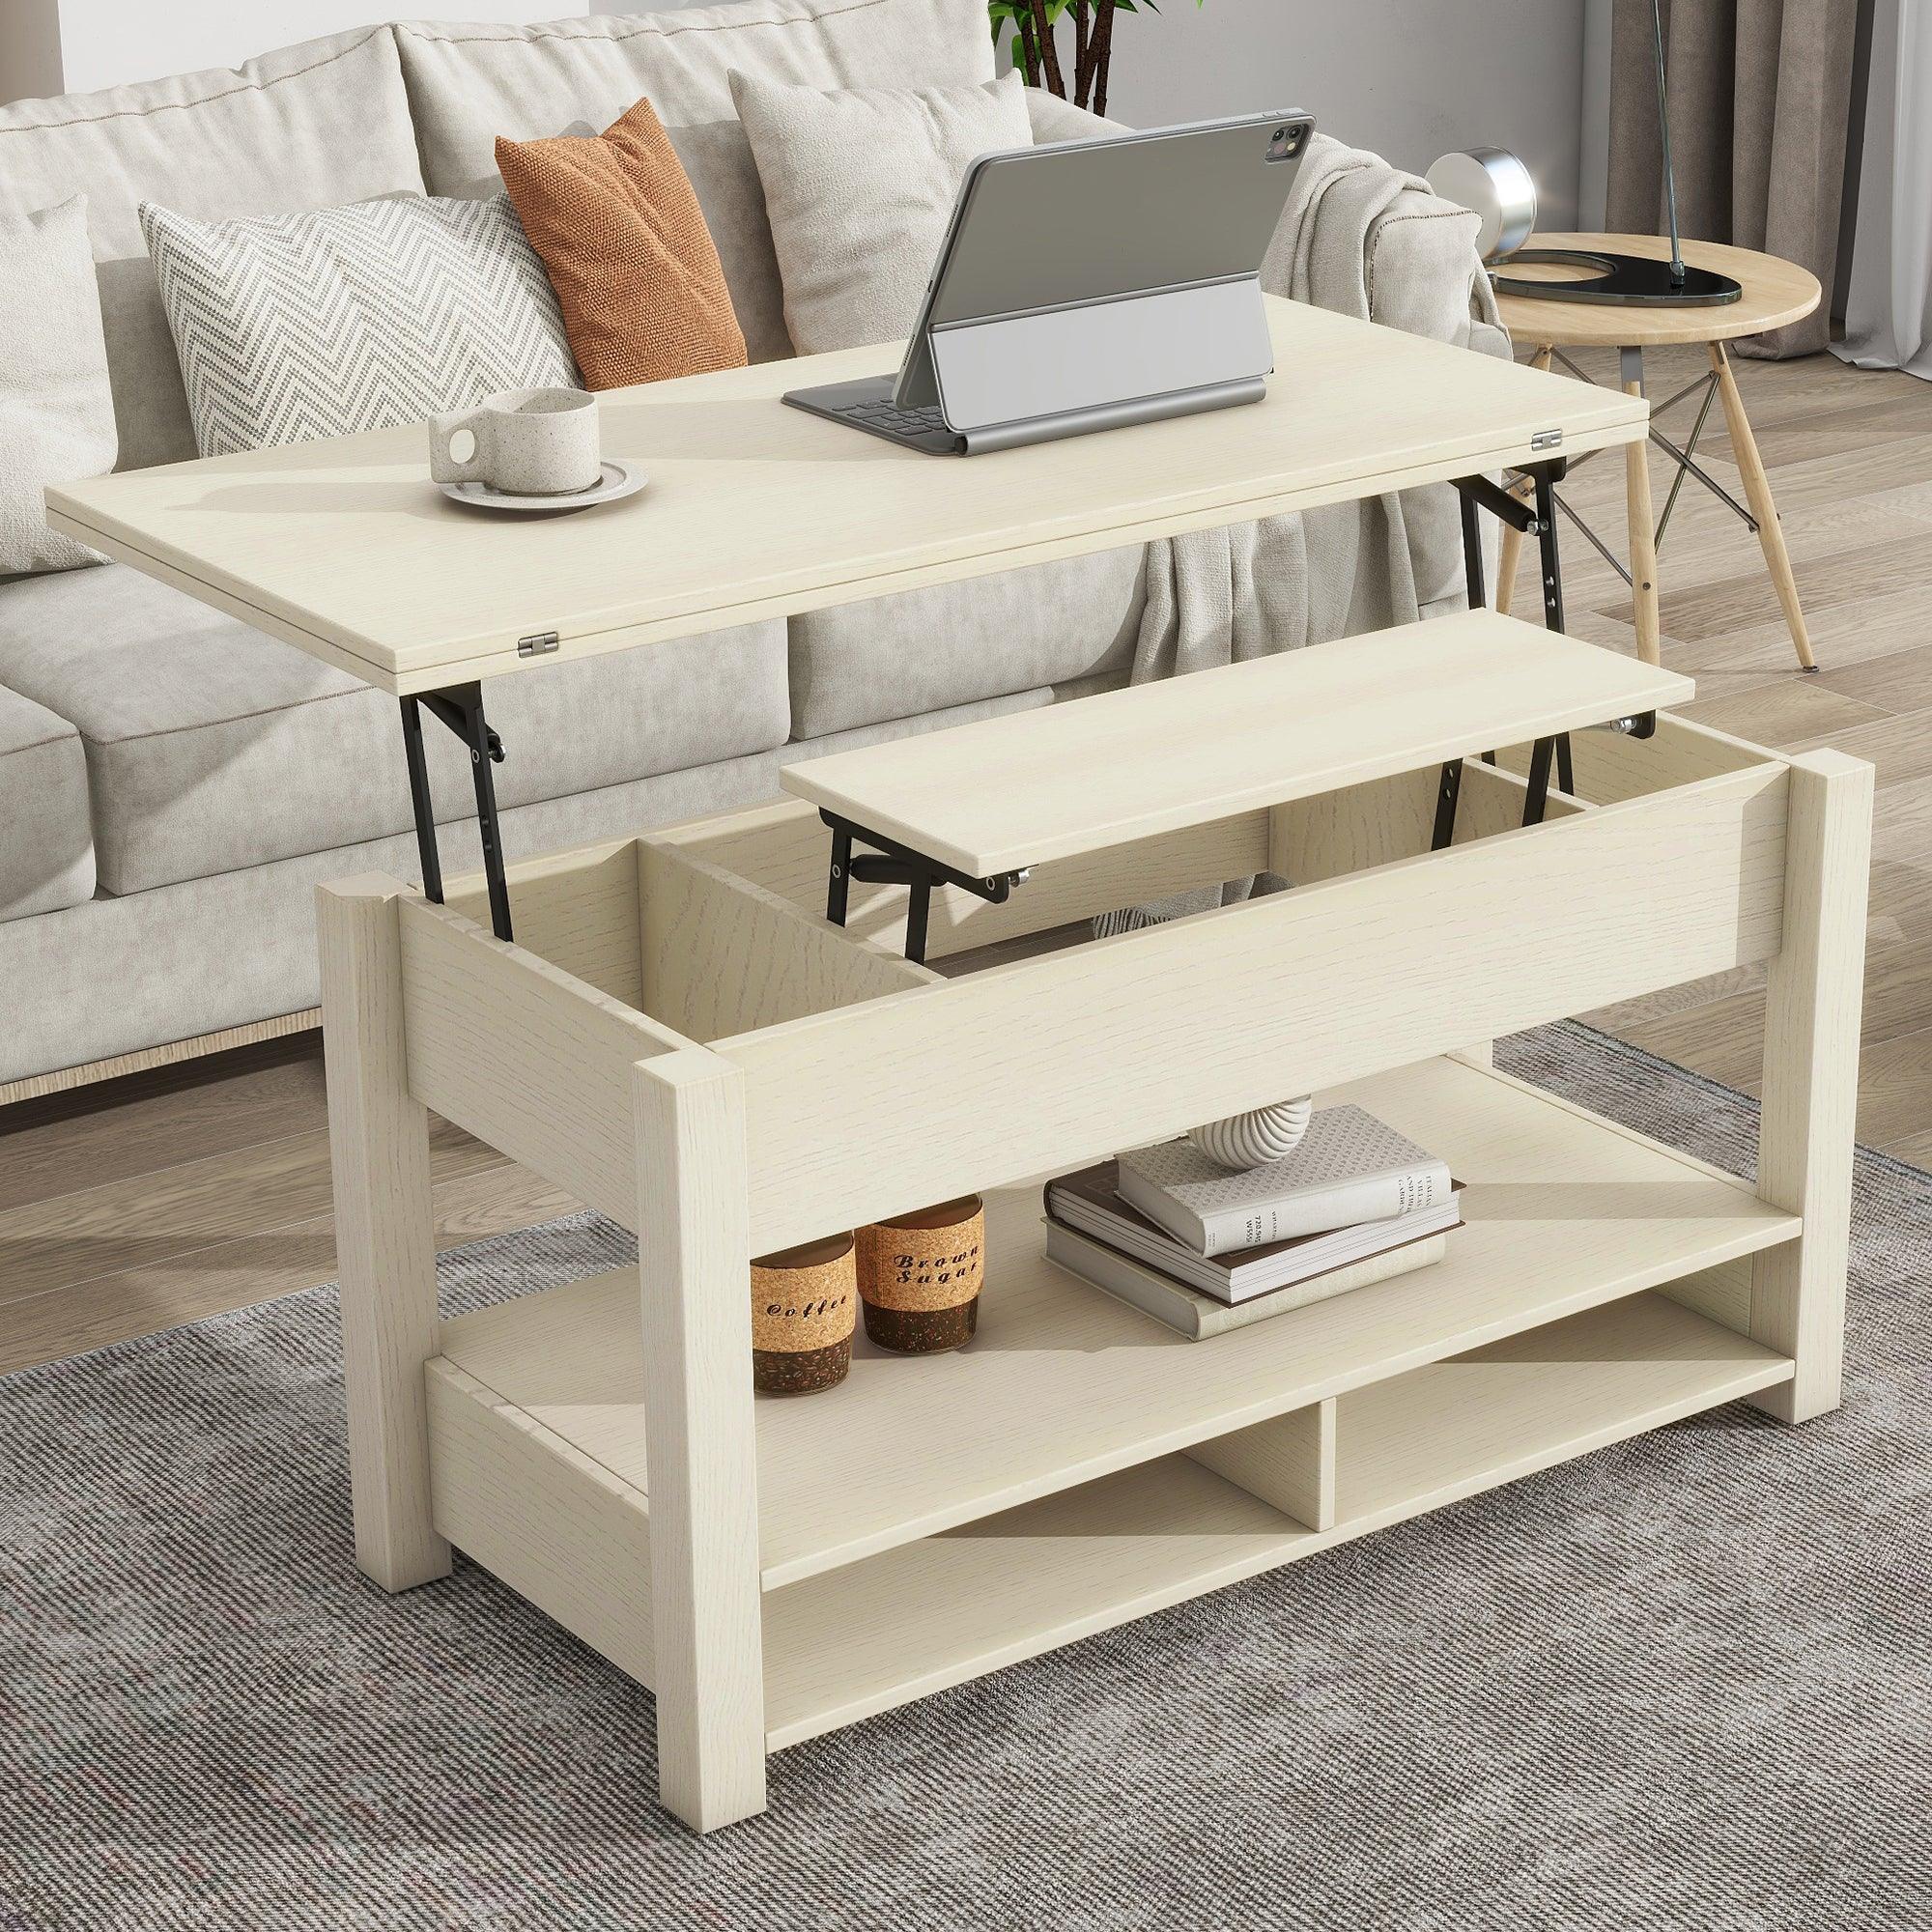 🆓🚛 Lift Top Coffee Table, Multi-Functional Coffee Table With Open Shelves, Modern Lift Tabletop Dining Table for Living Room, Home Office, Rustic Ivory